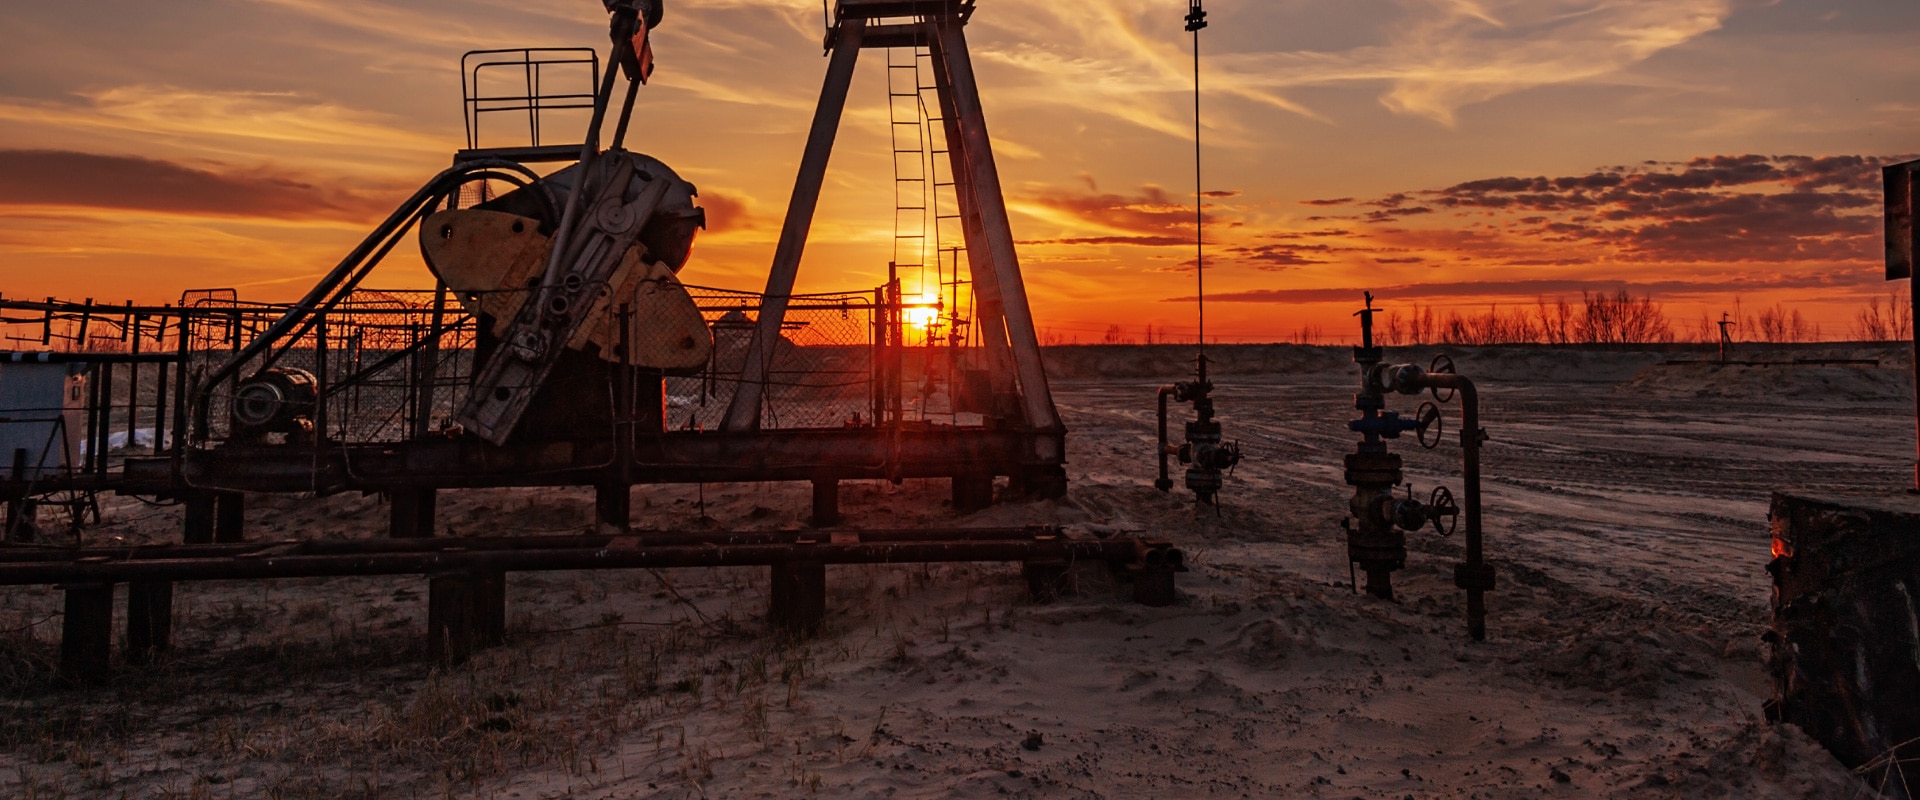 oil well at sunset